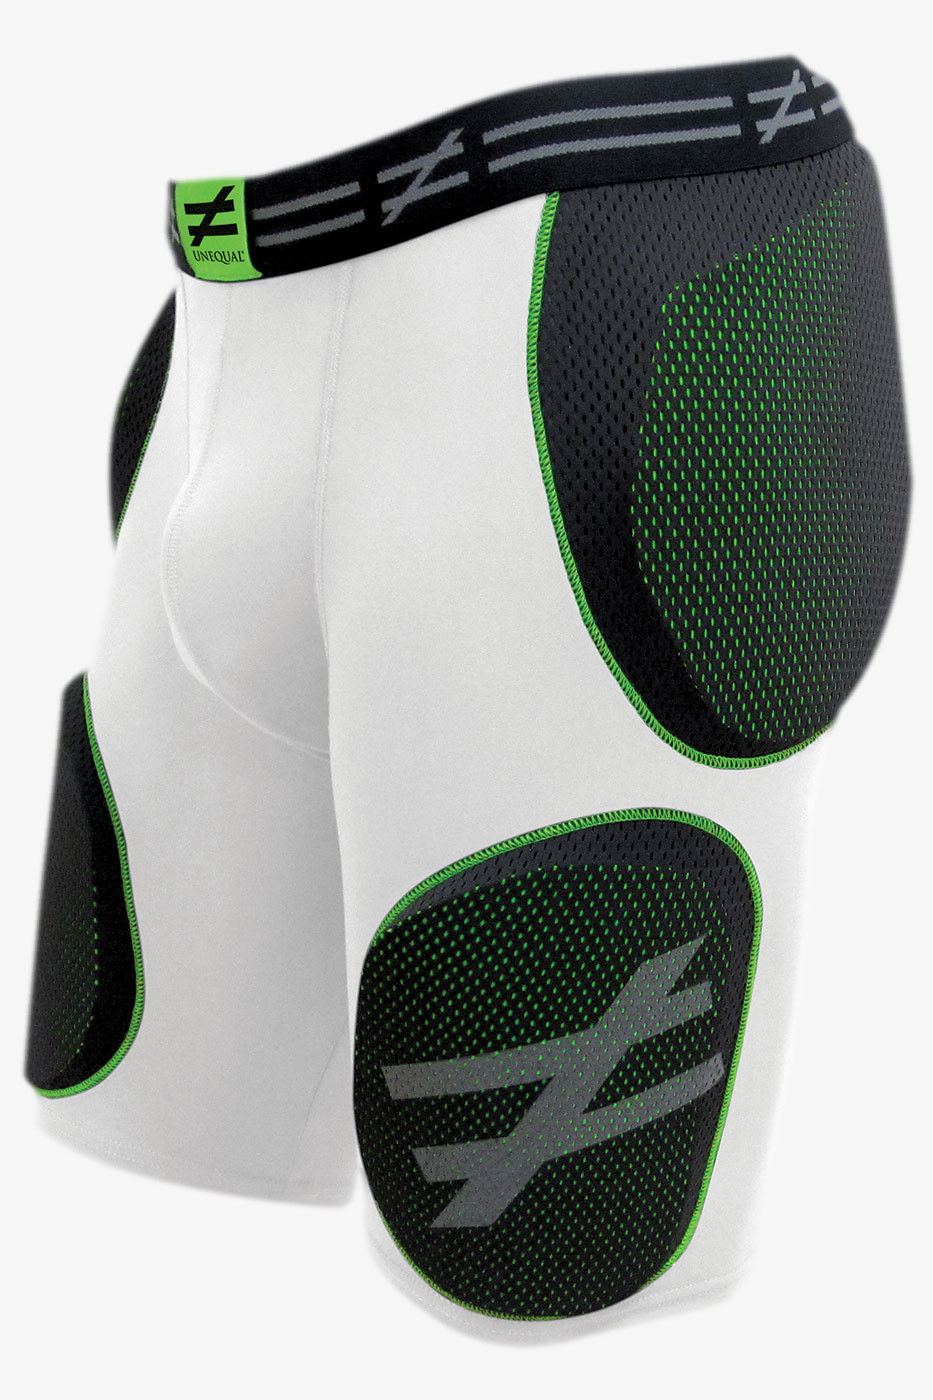 Football Girdles for sale in Montreal, Quebec